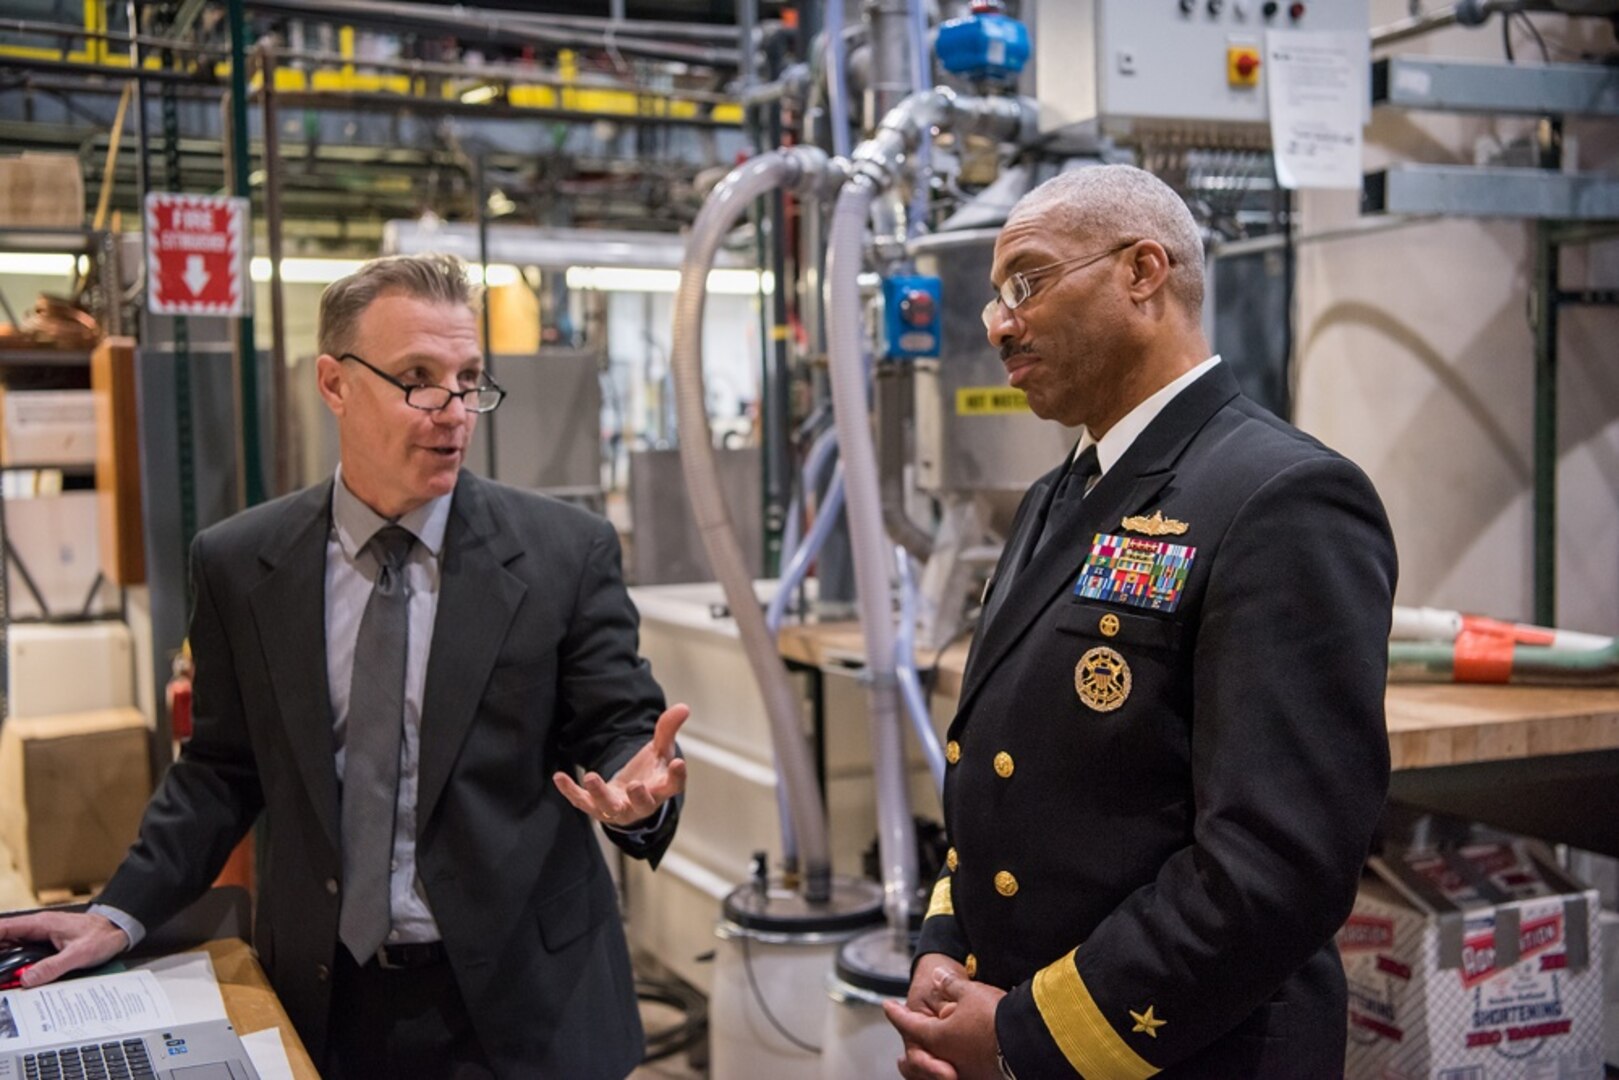 Rear Adm. Jesse Wilson, commander, Naval Surface Force Atlantic, listens to Bill Hertel, a mechanical engineer with the Solid Waste, Pollution Prevention and Hazardous Material Management Branch, on Feb. 13, 2018, as he describes the Mobile Cleaning, Recovery and Recycling System that is used onboard ships for flight deck cleaning. During Wilson's visit to Naval Surface Warfare Center, Carderock Division in West Bethesda, Md., he was a guest speaker for the Black History Month celebration.